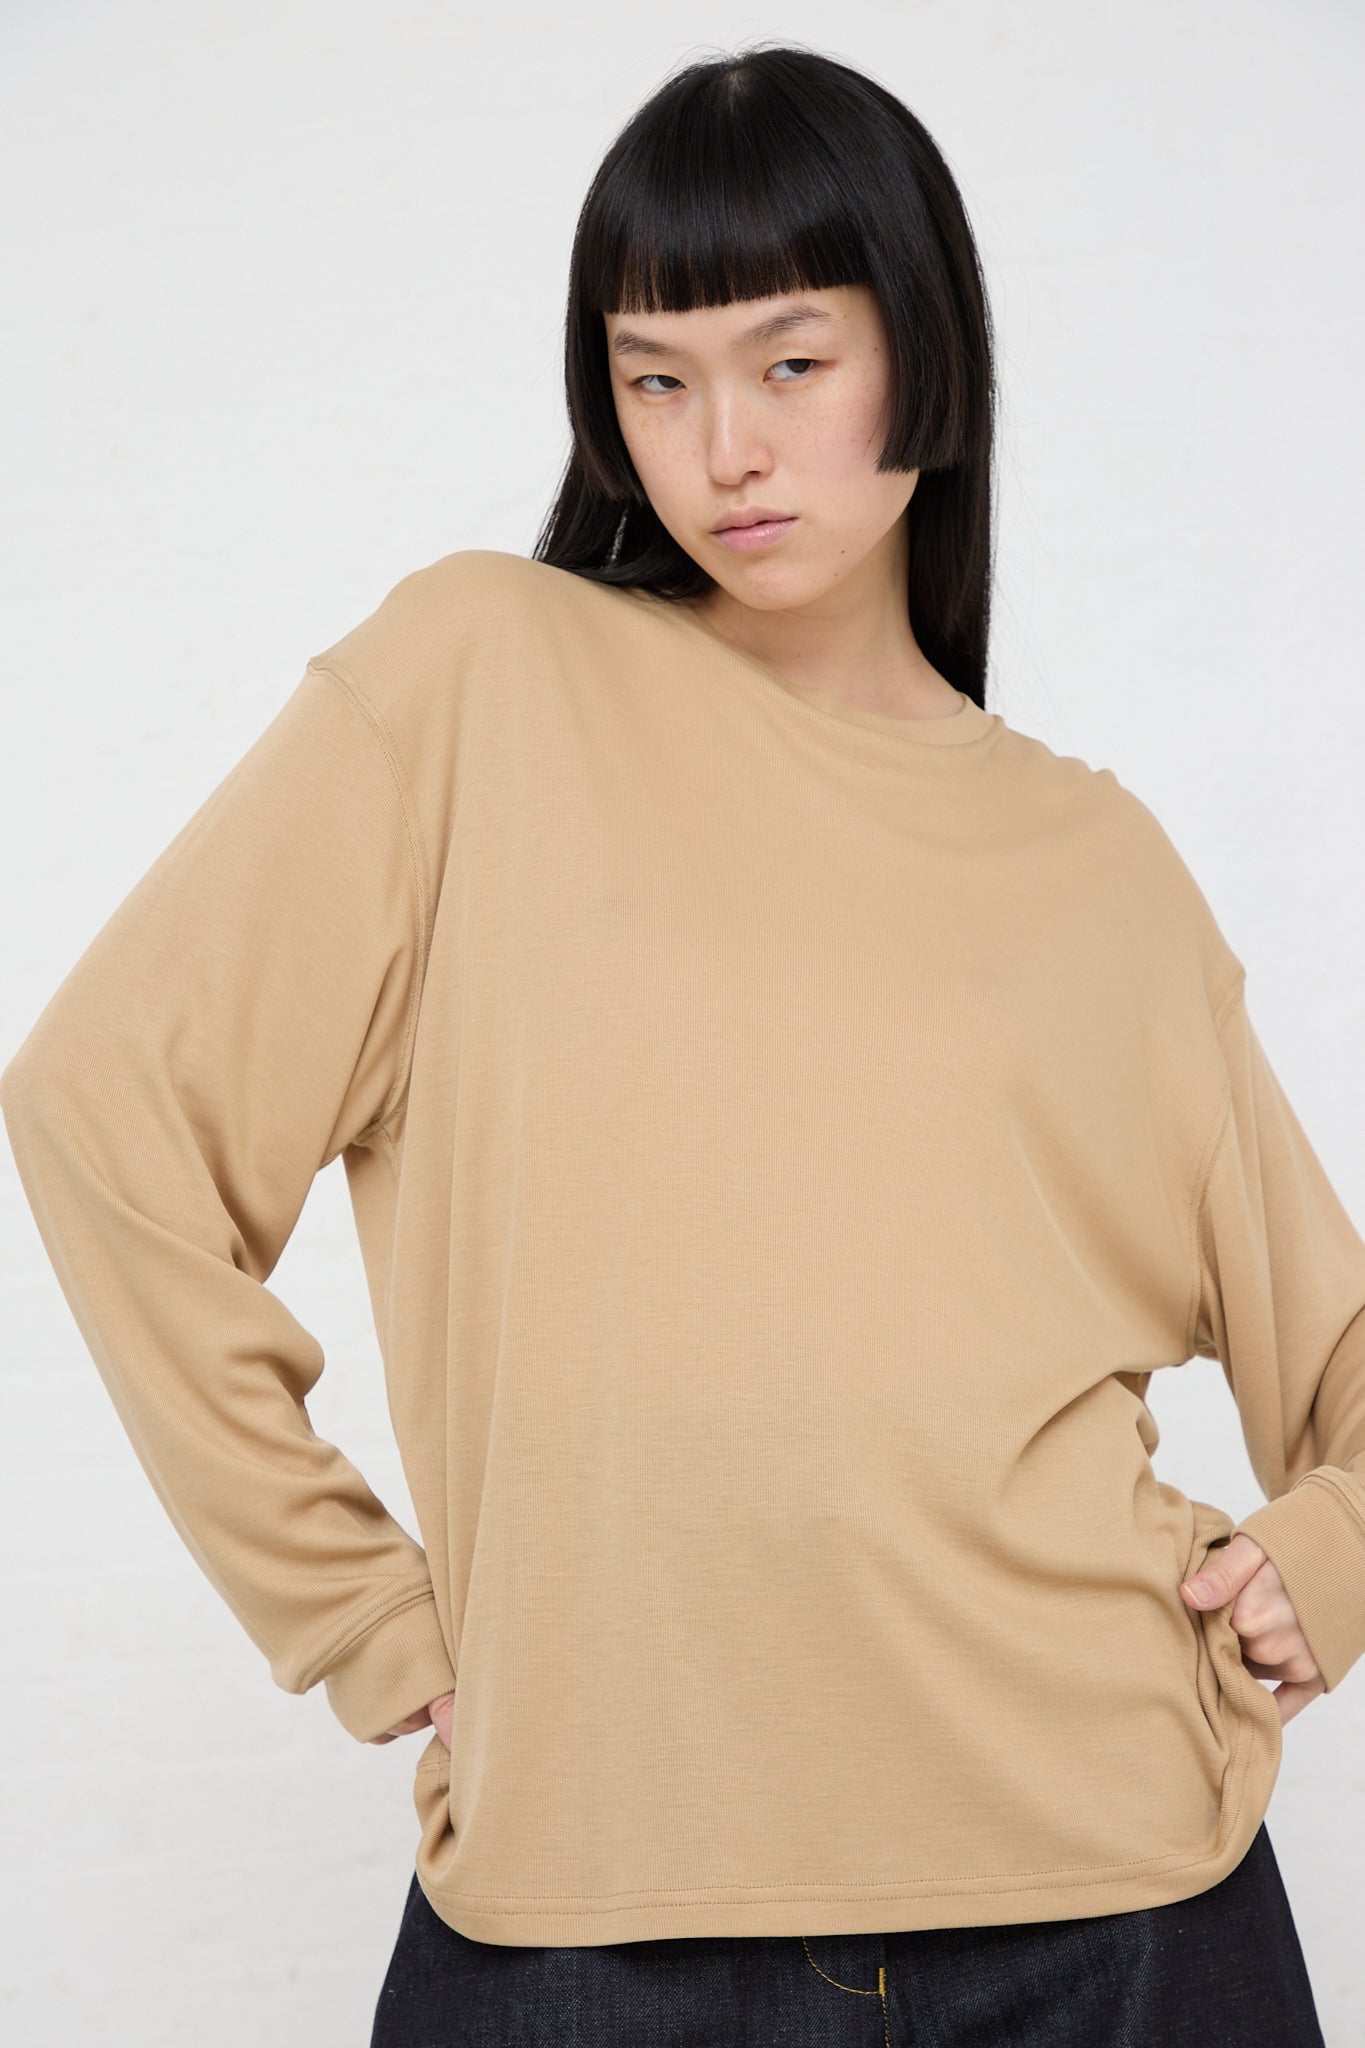 The model is wearing the Studio Nicholson Simmons Long Sleeve Top in Sand.